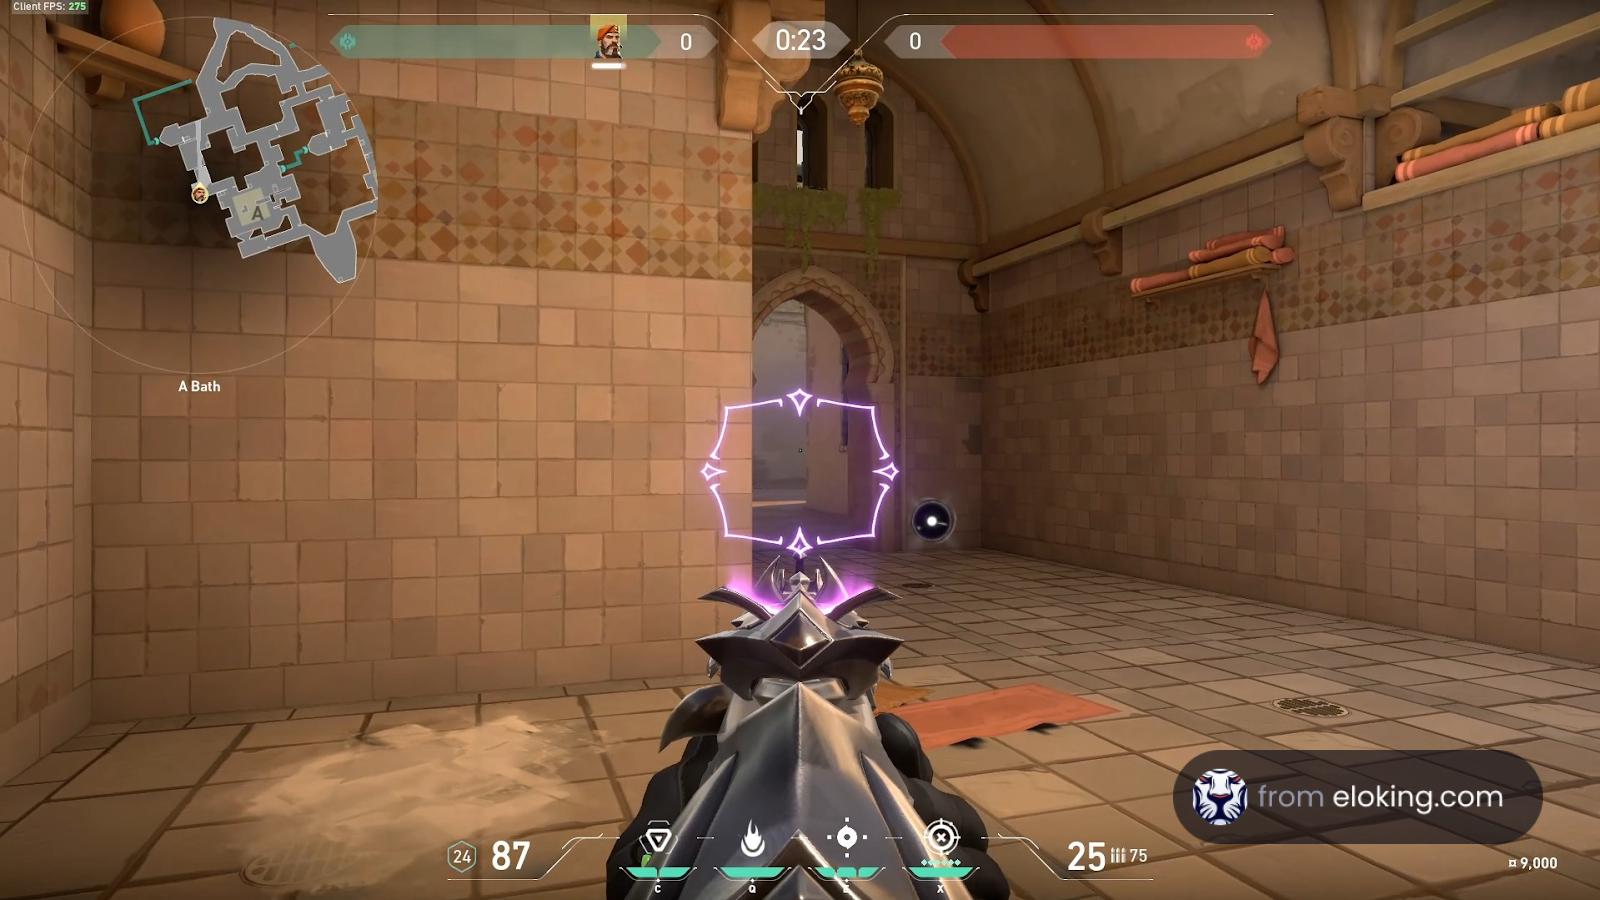 Player using a rifle in a first person shooter game, approaching a site with a large purple orb obstructing the path